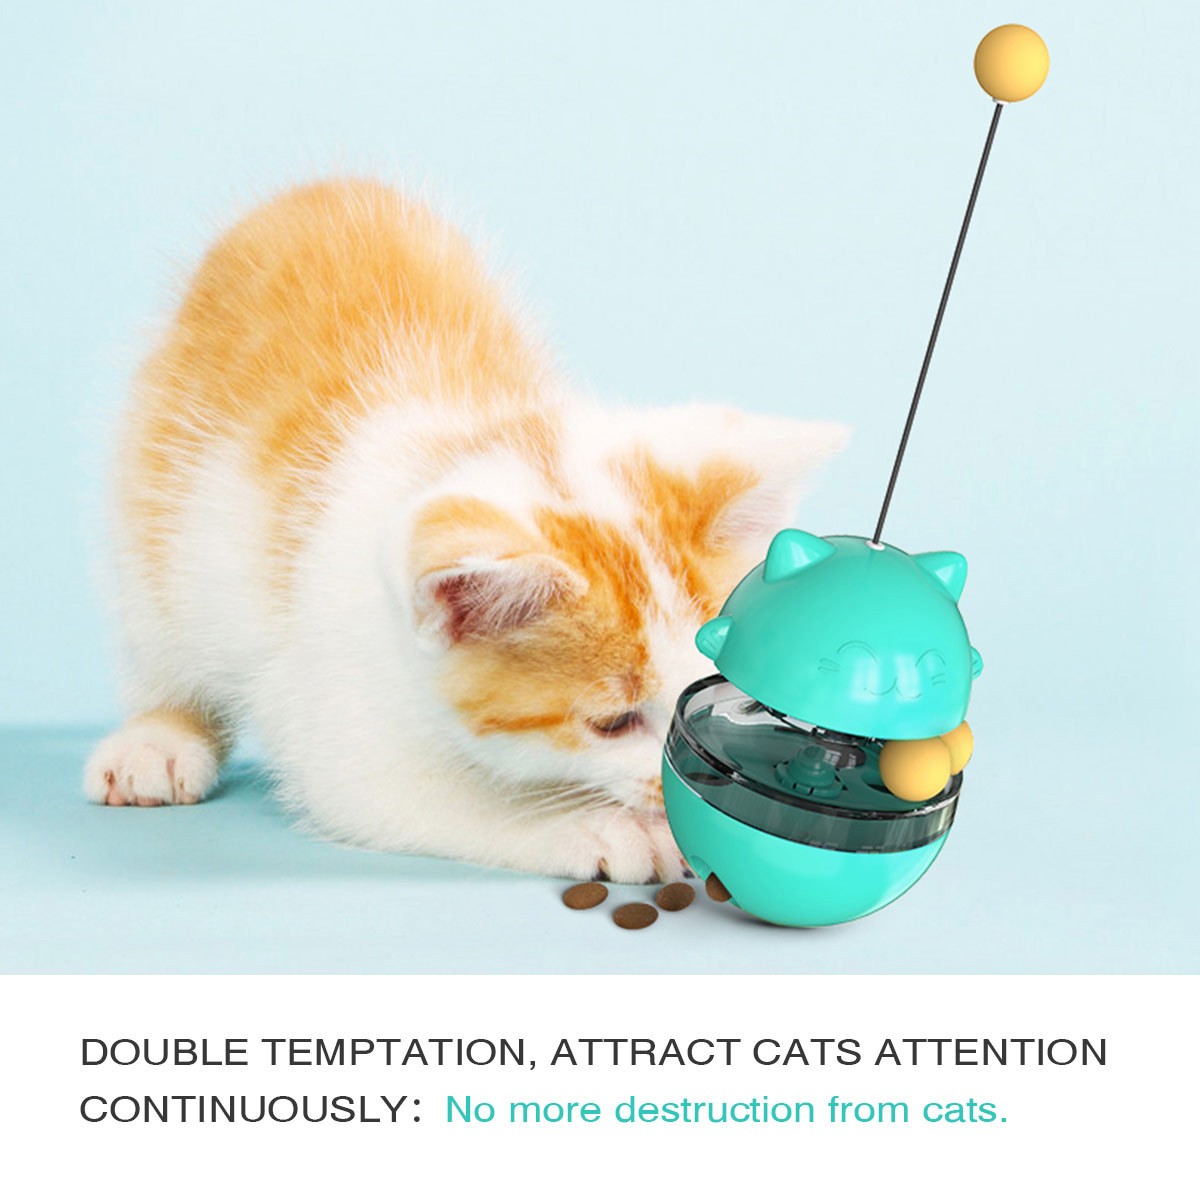 Pet-Interactive-Tumbler-Toy-Leaking-Food-Ball-Toy-Cat-Stick-Turntable-Toy-Funny-Pet-Training-Tool-1750005-4